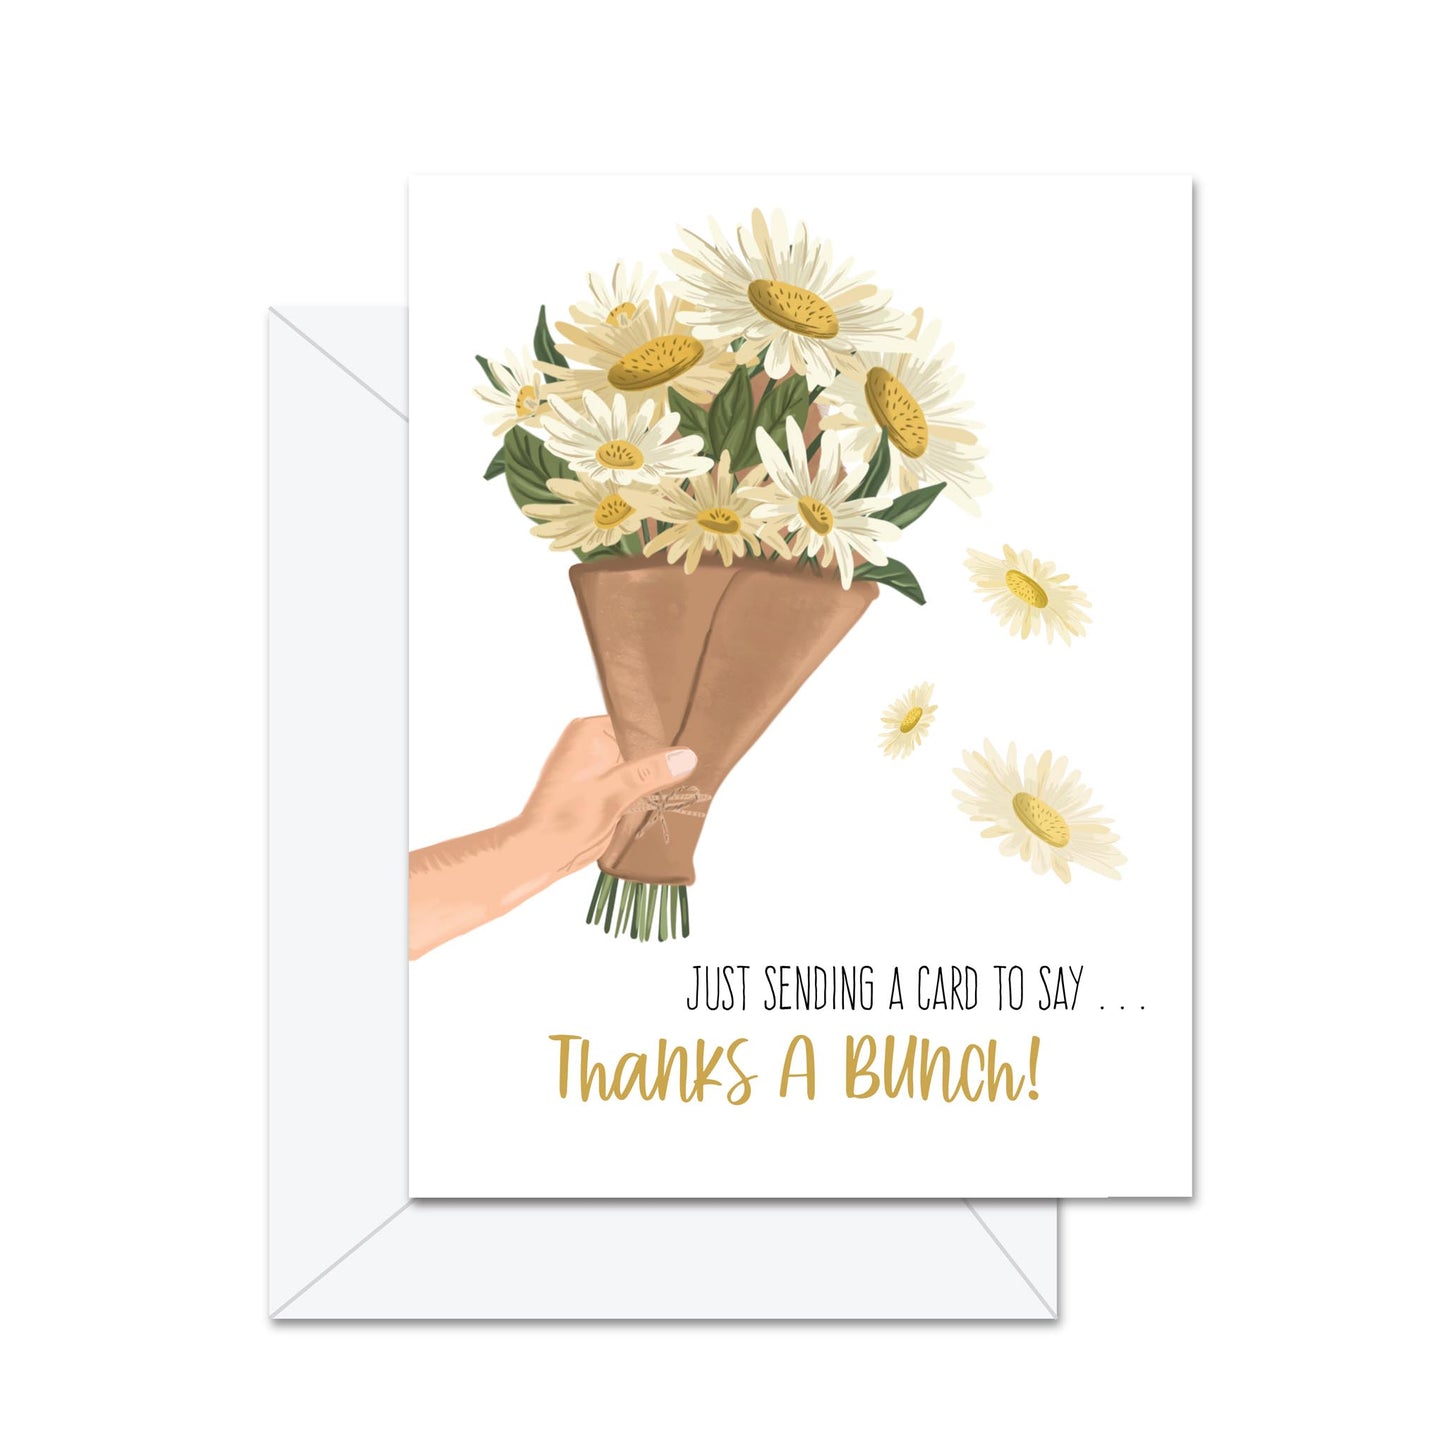 Just Sending A Card To Say . . . Thanks A Bunch - Greeting Card